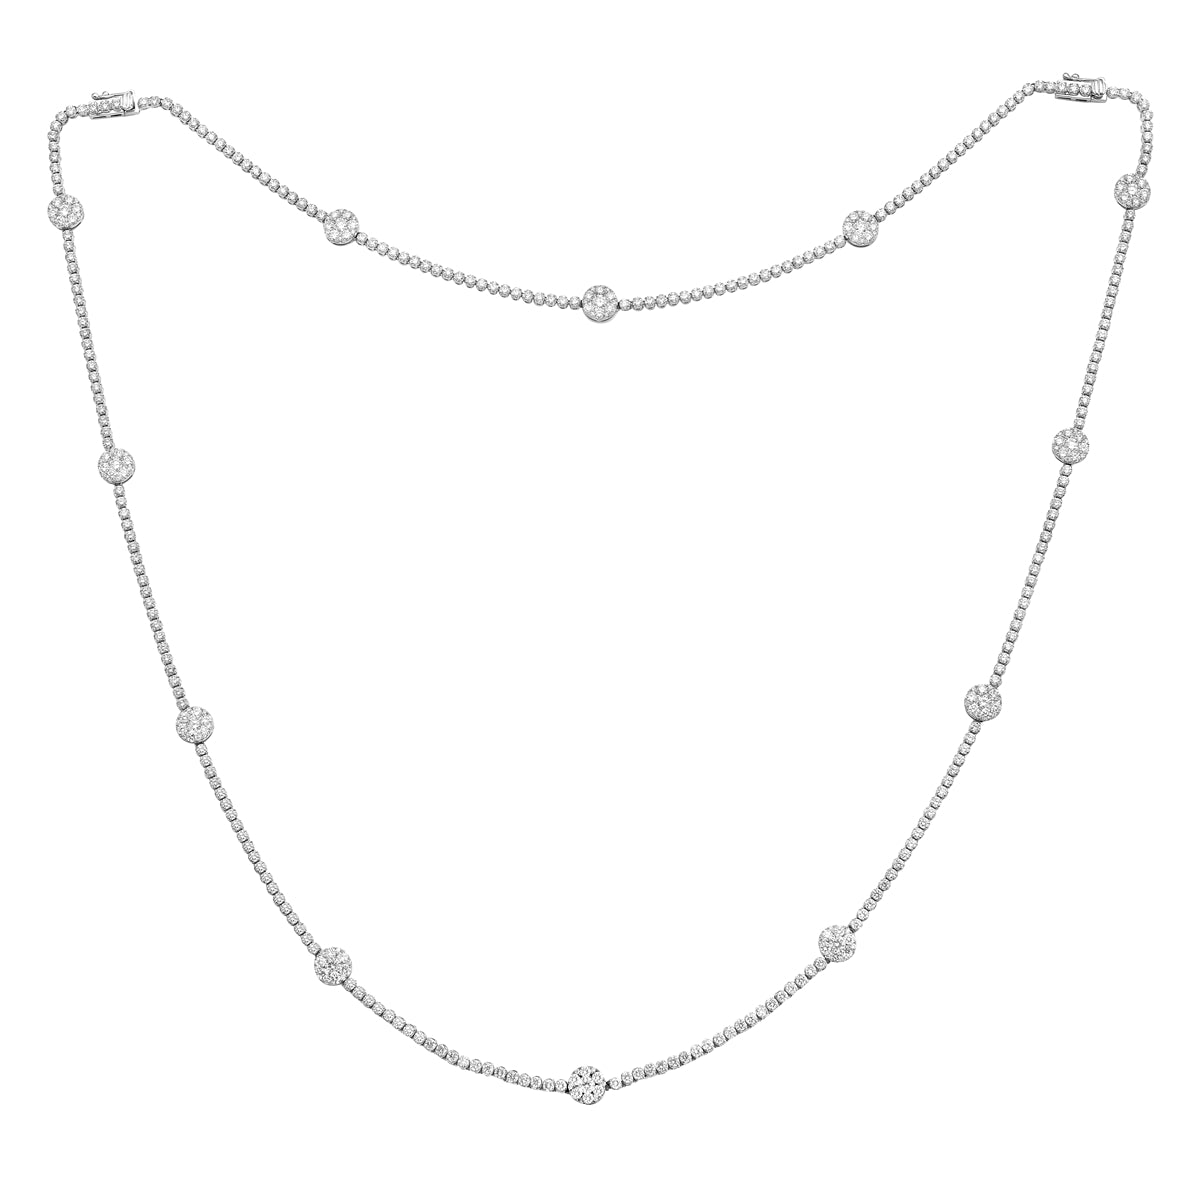 Necklace 14KW/9.43G 422RD-9.51